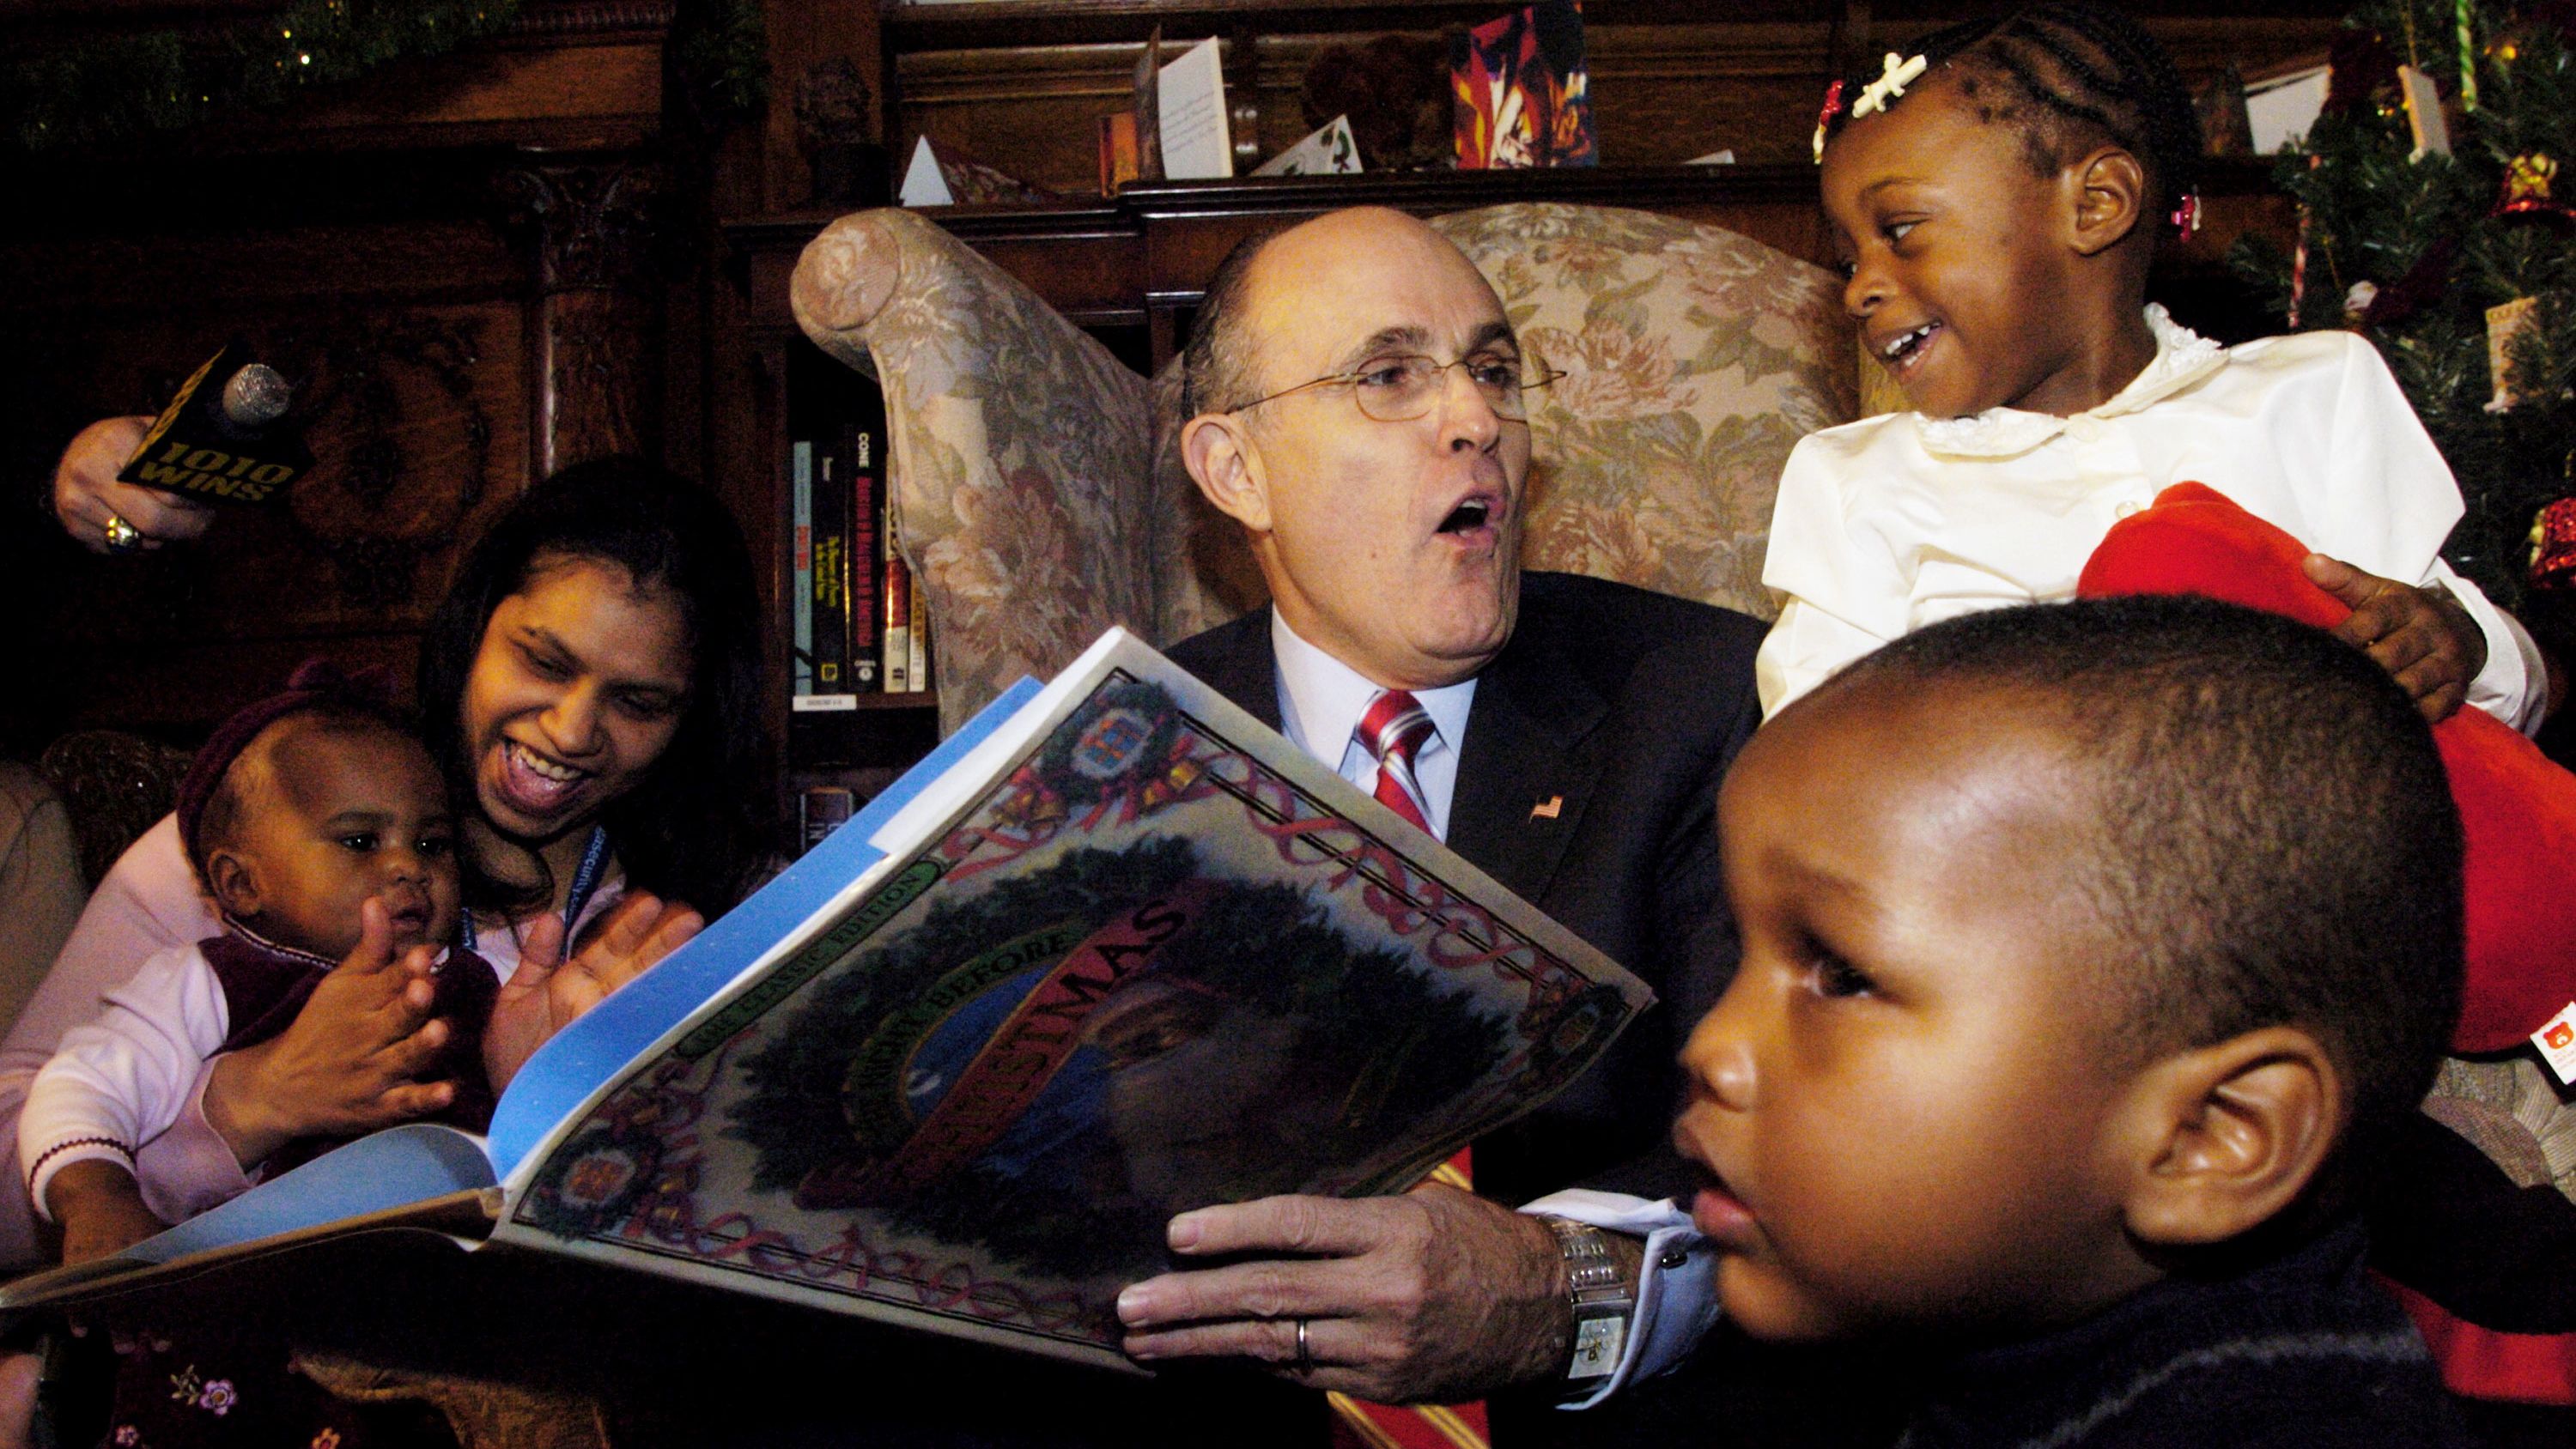 Giuliani reads "The Night Before Christmas" to children while visiting an orphanage in New York in December 2004.